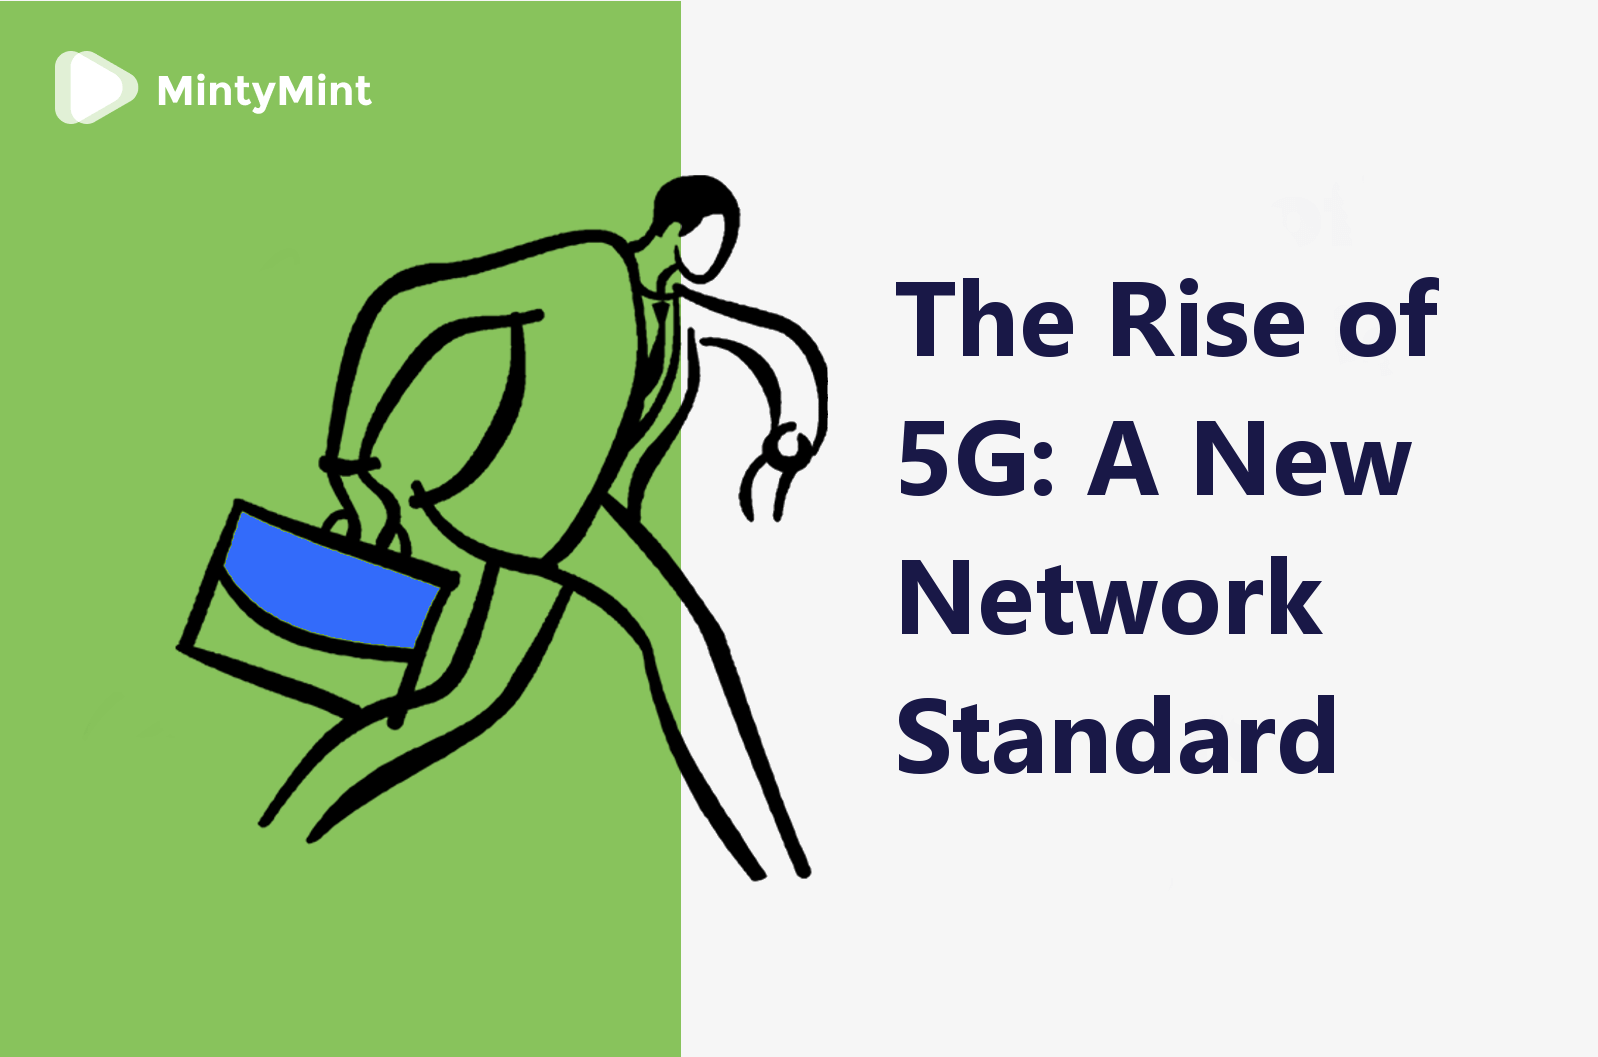 The Rise of 5G: A New Network Standard